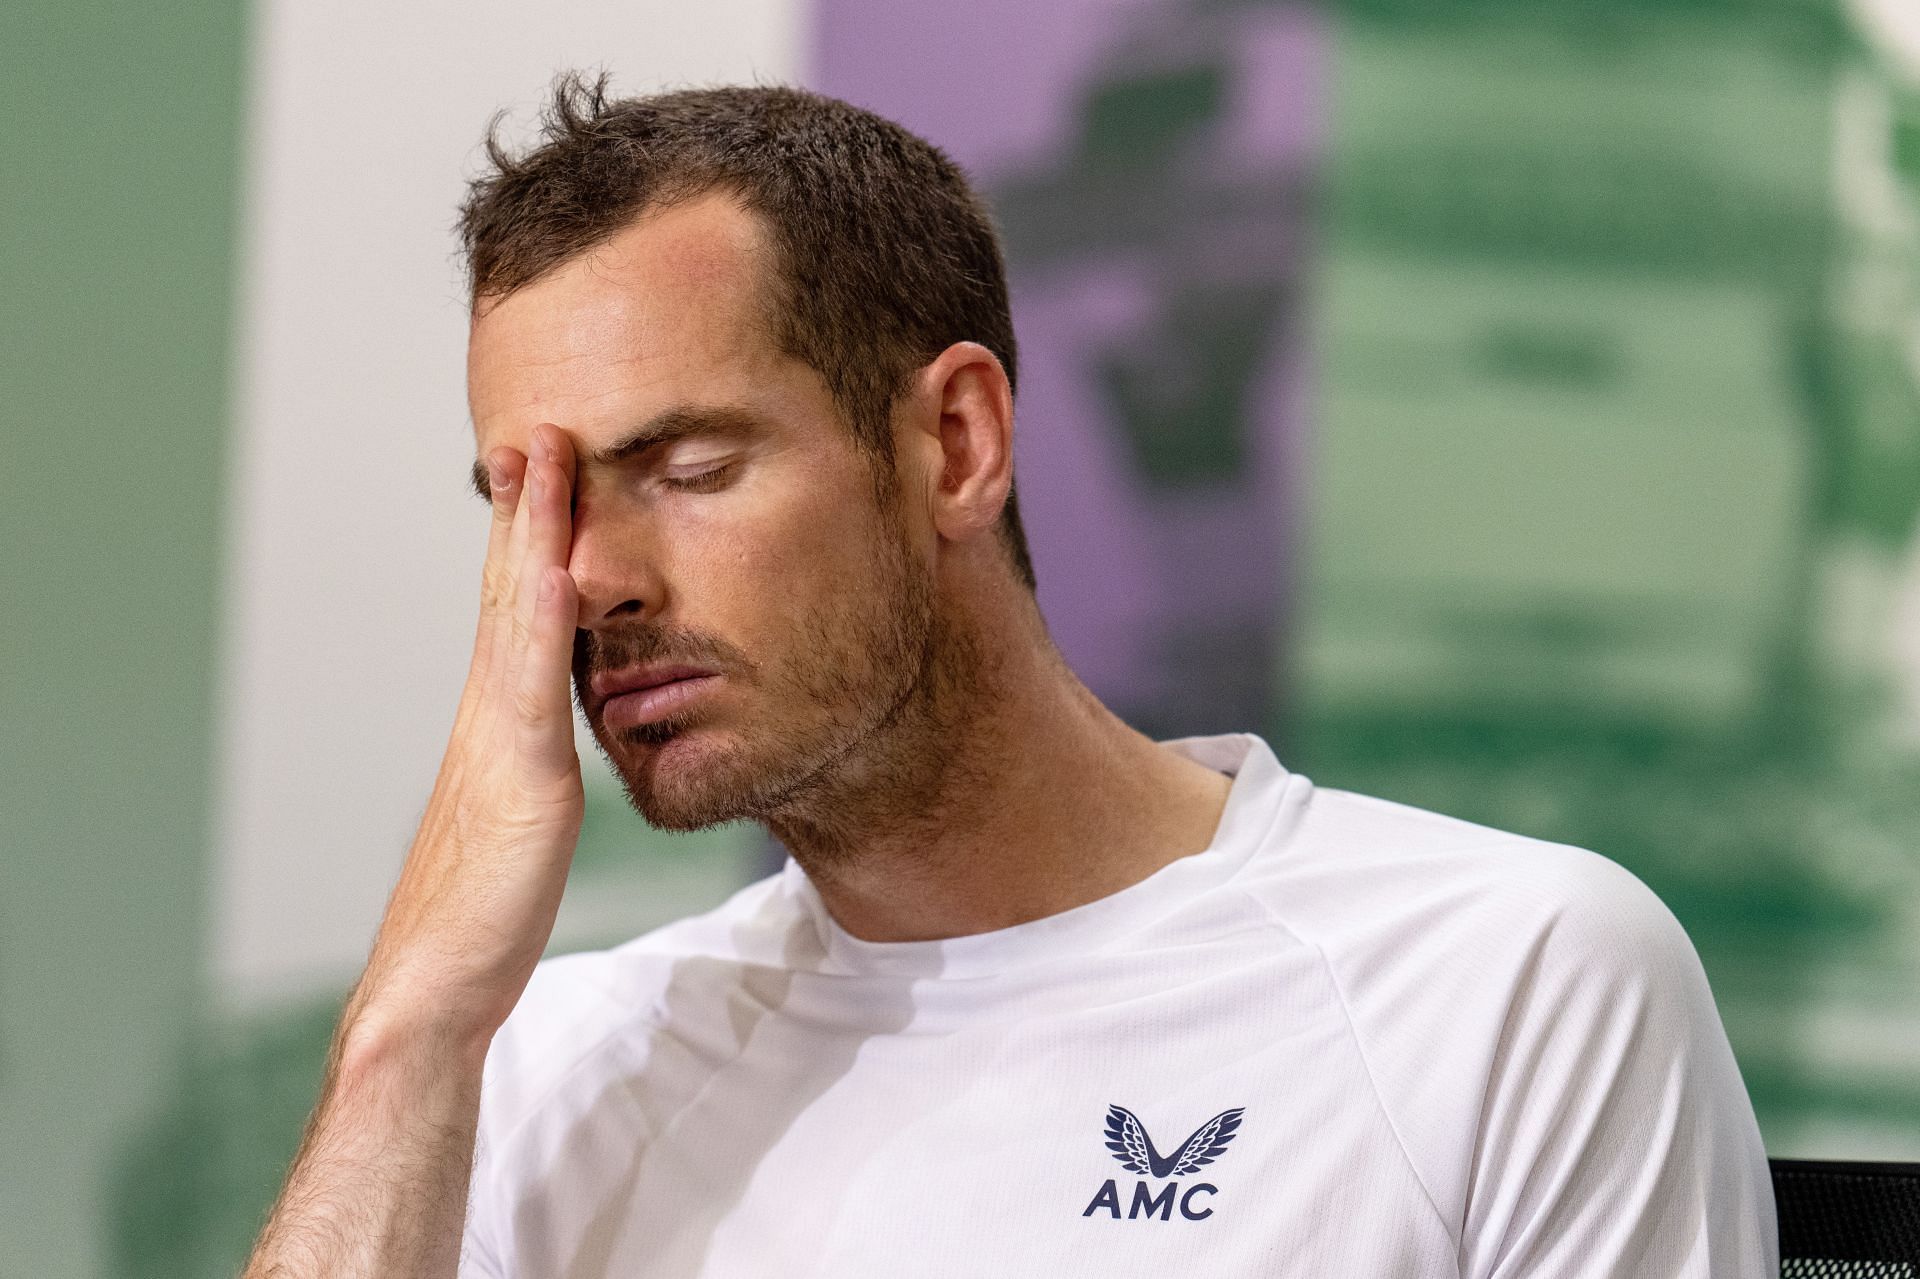 Andy Murray offered the rationale behind his decision to donate his prize money.